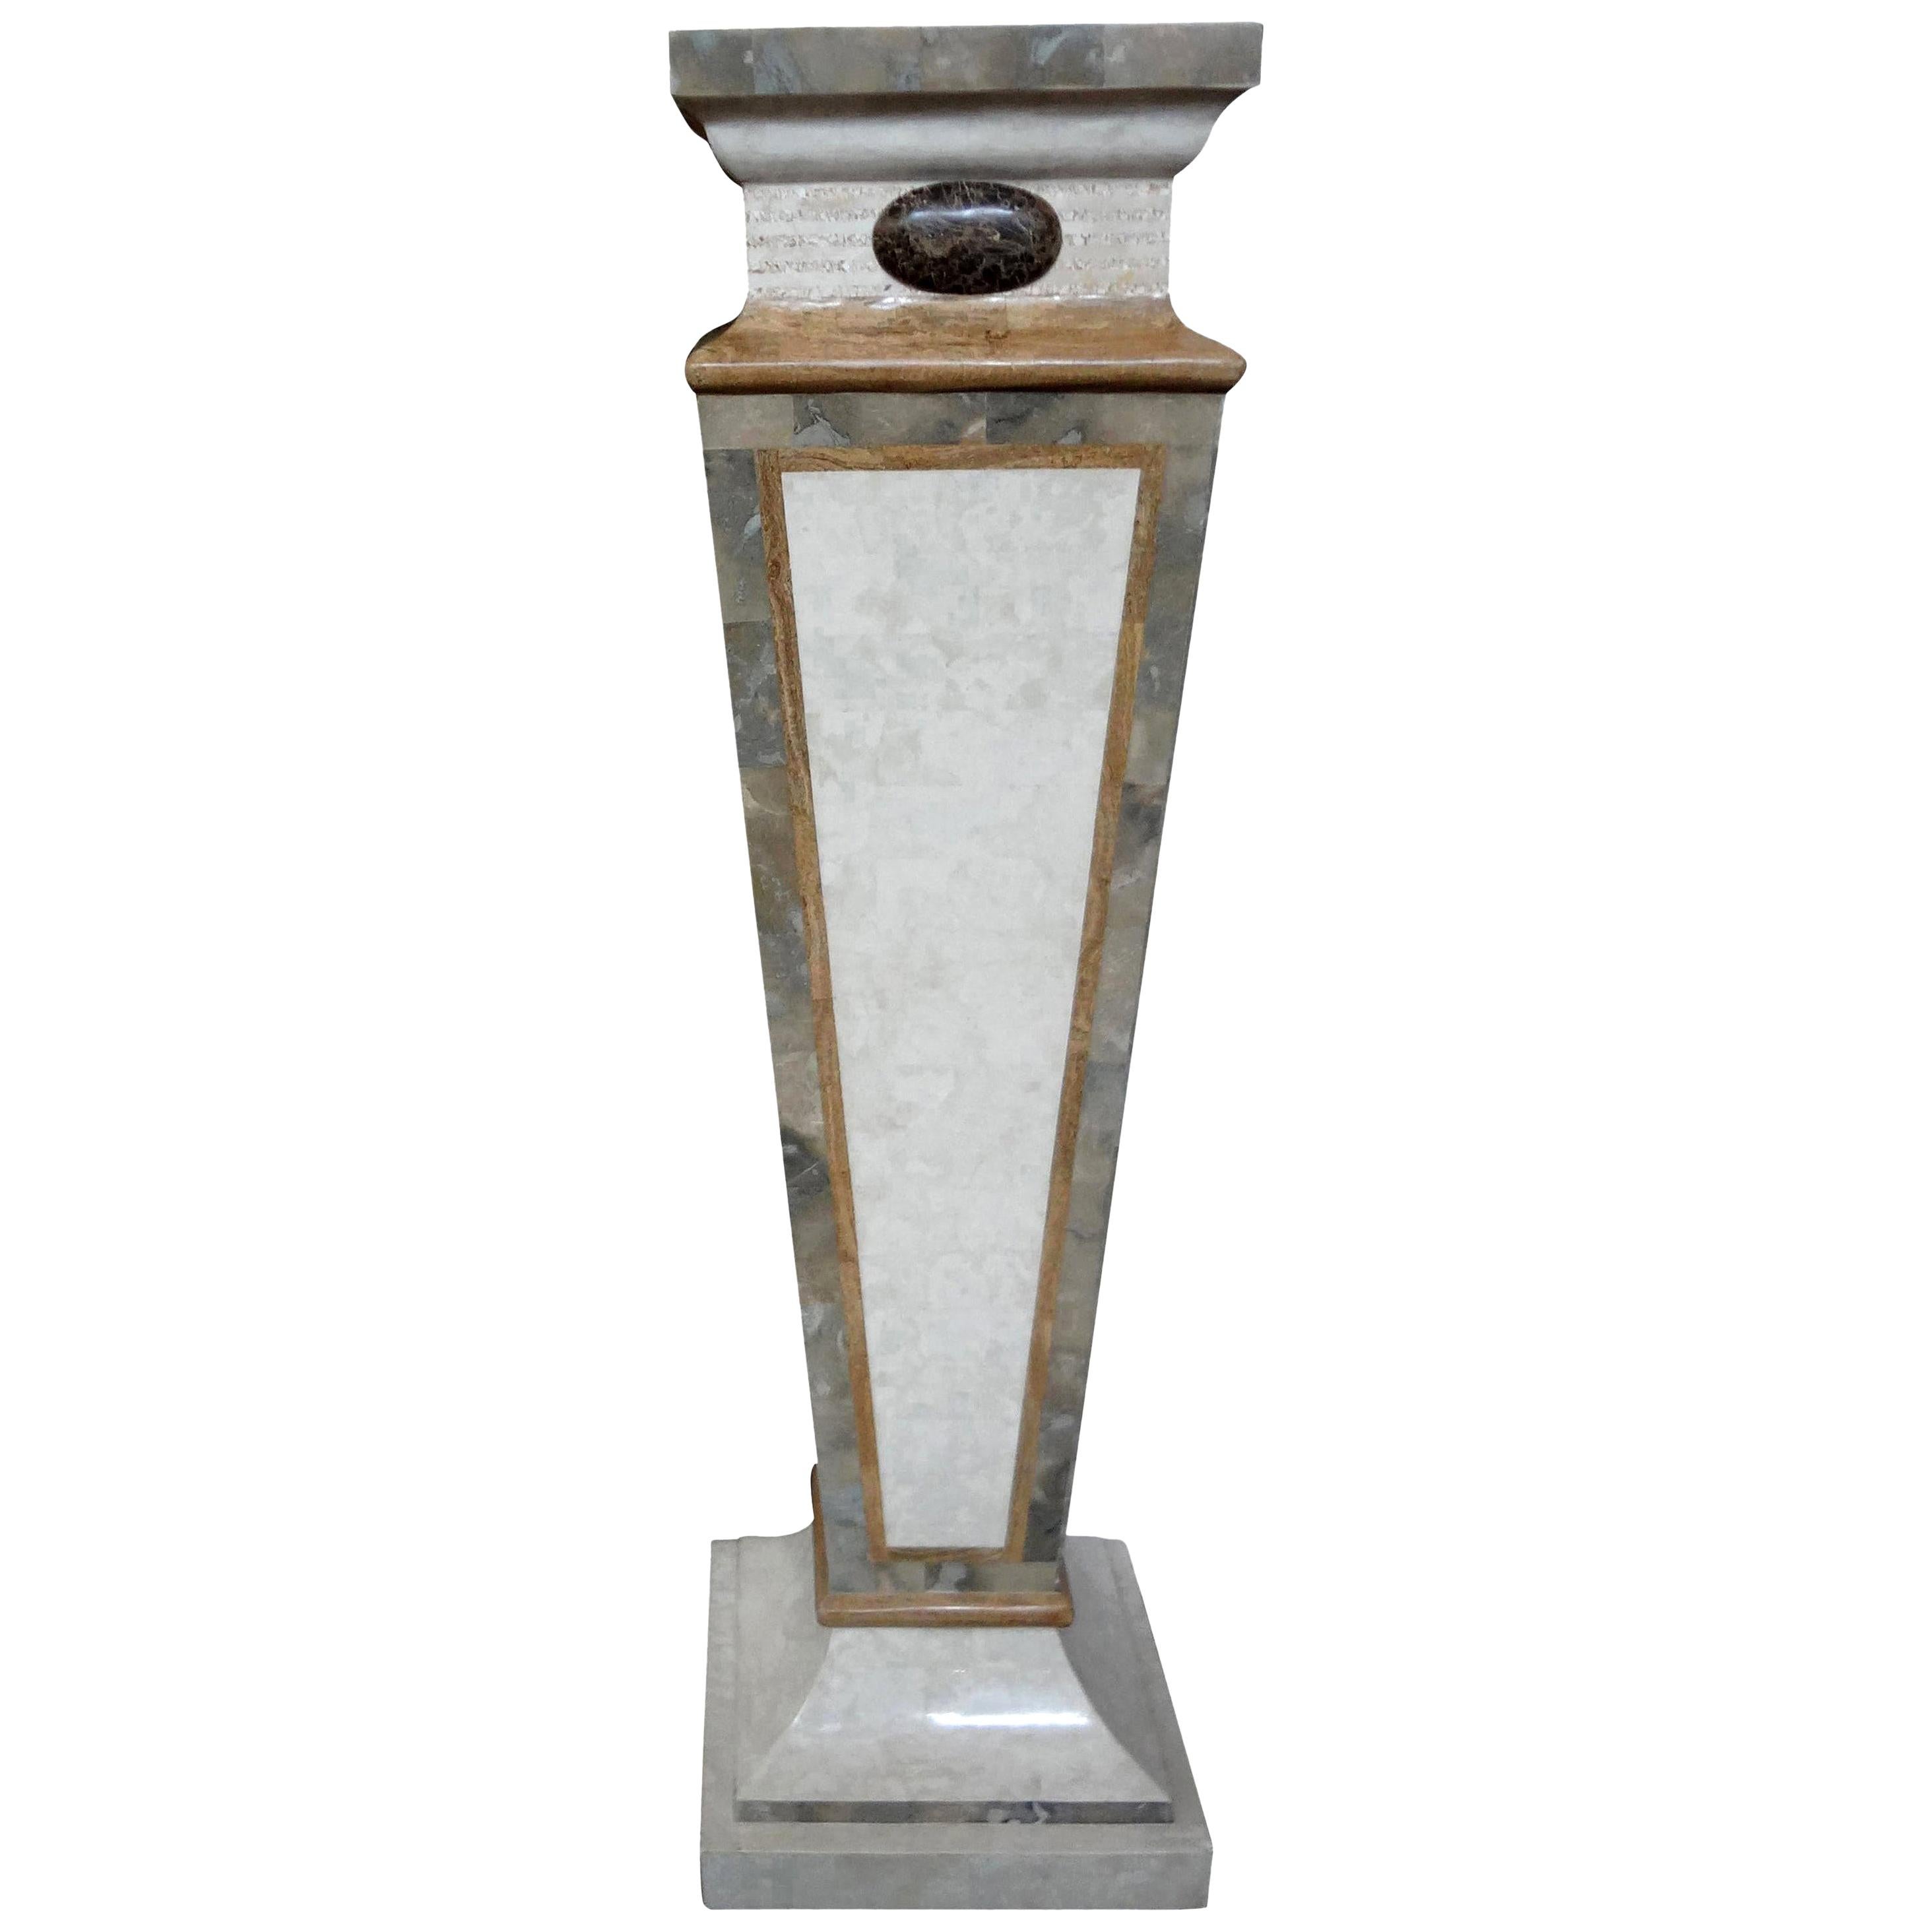 Tessellated Travertine and Marble Geometric Pedestal Maitland-Smith Style